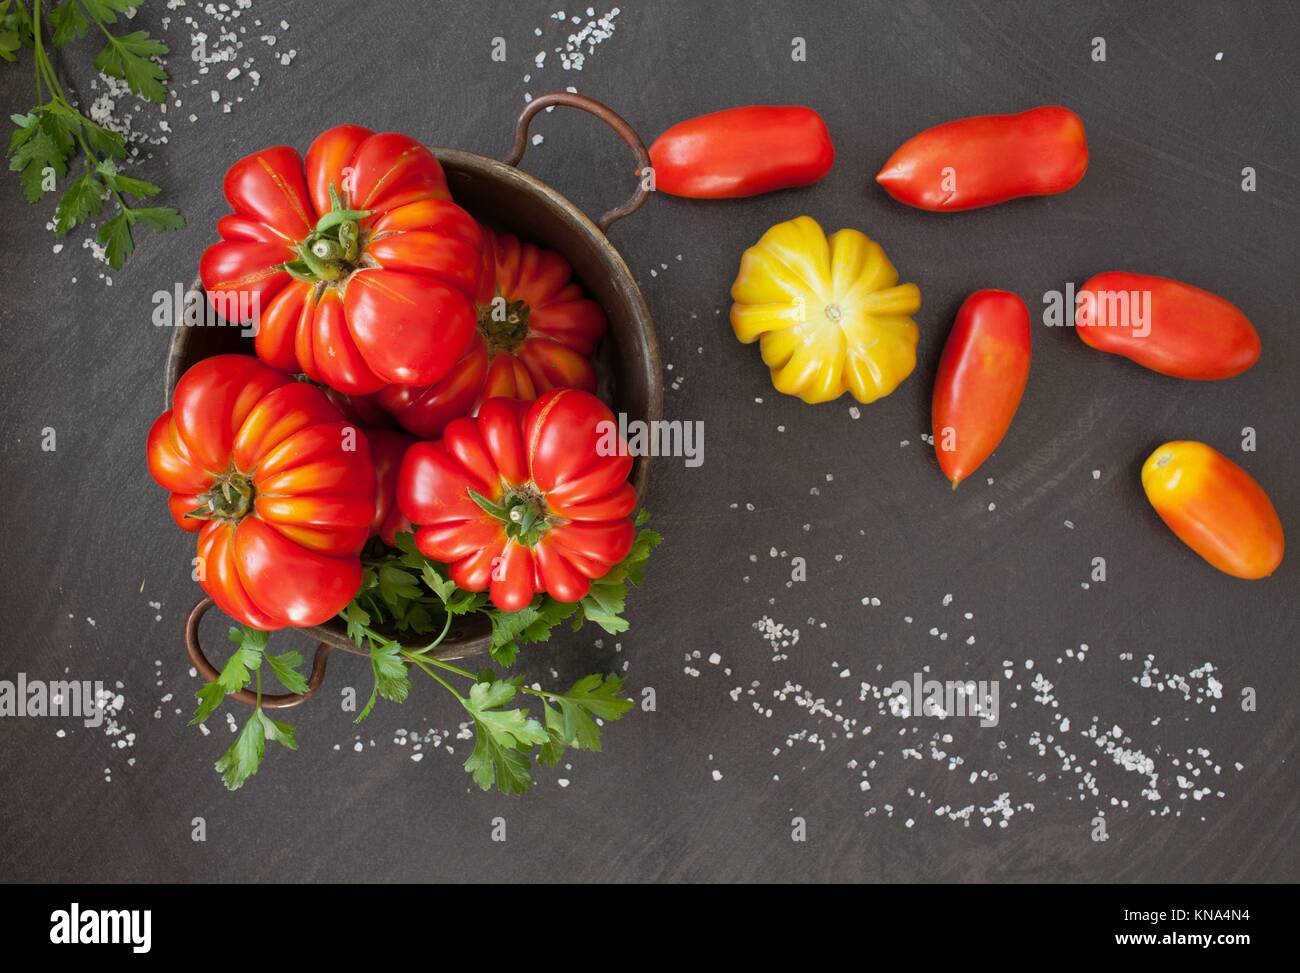 Fresh tomatoes: Heirloom and oblong type. Stock Photo